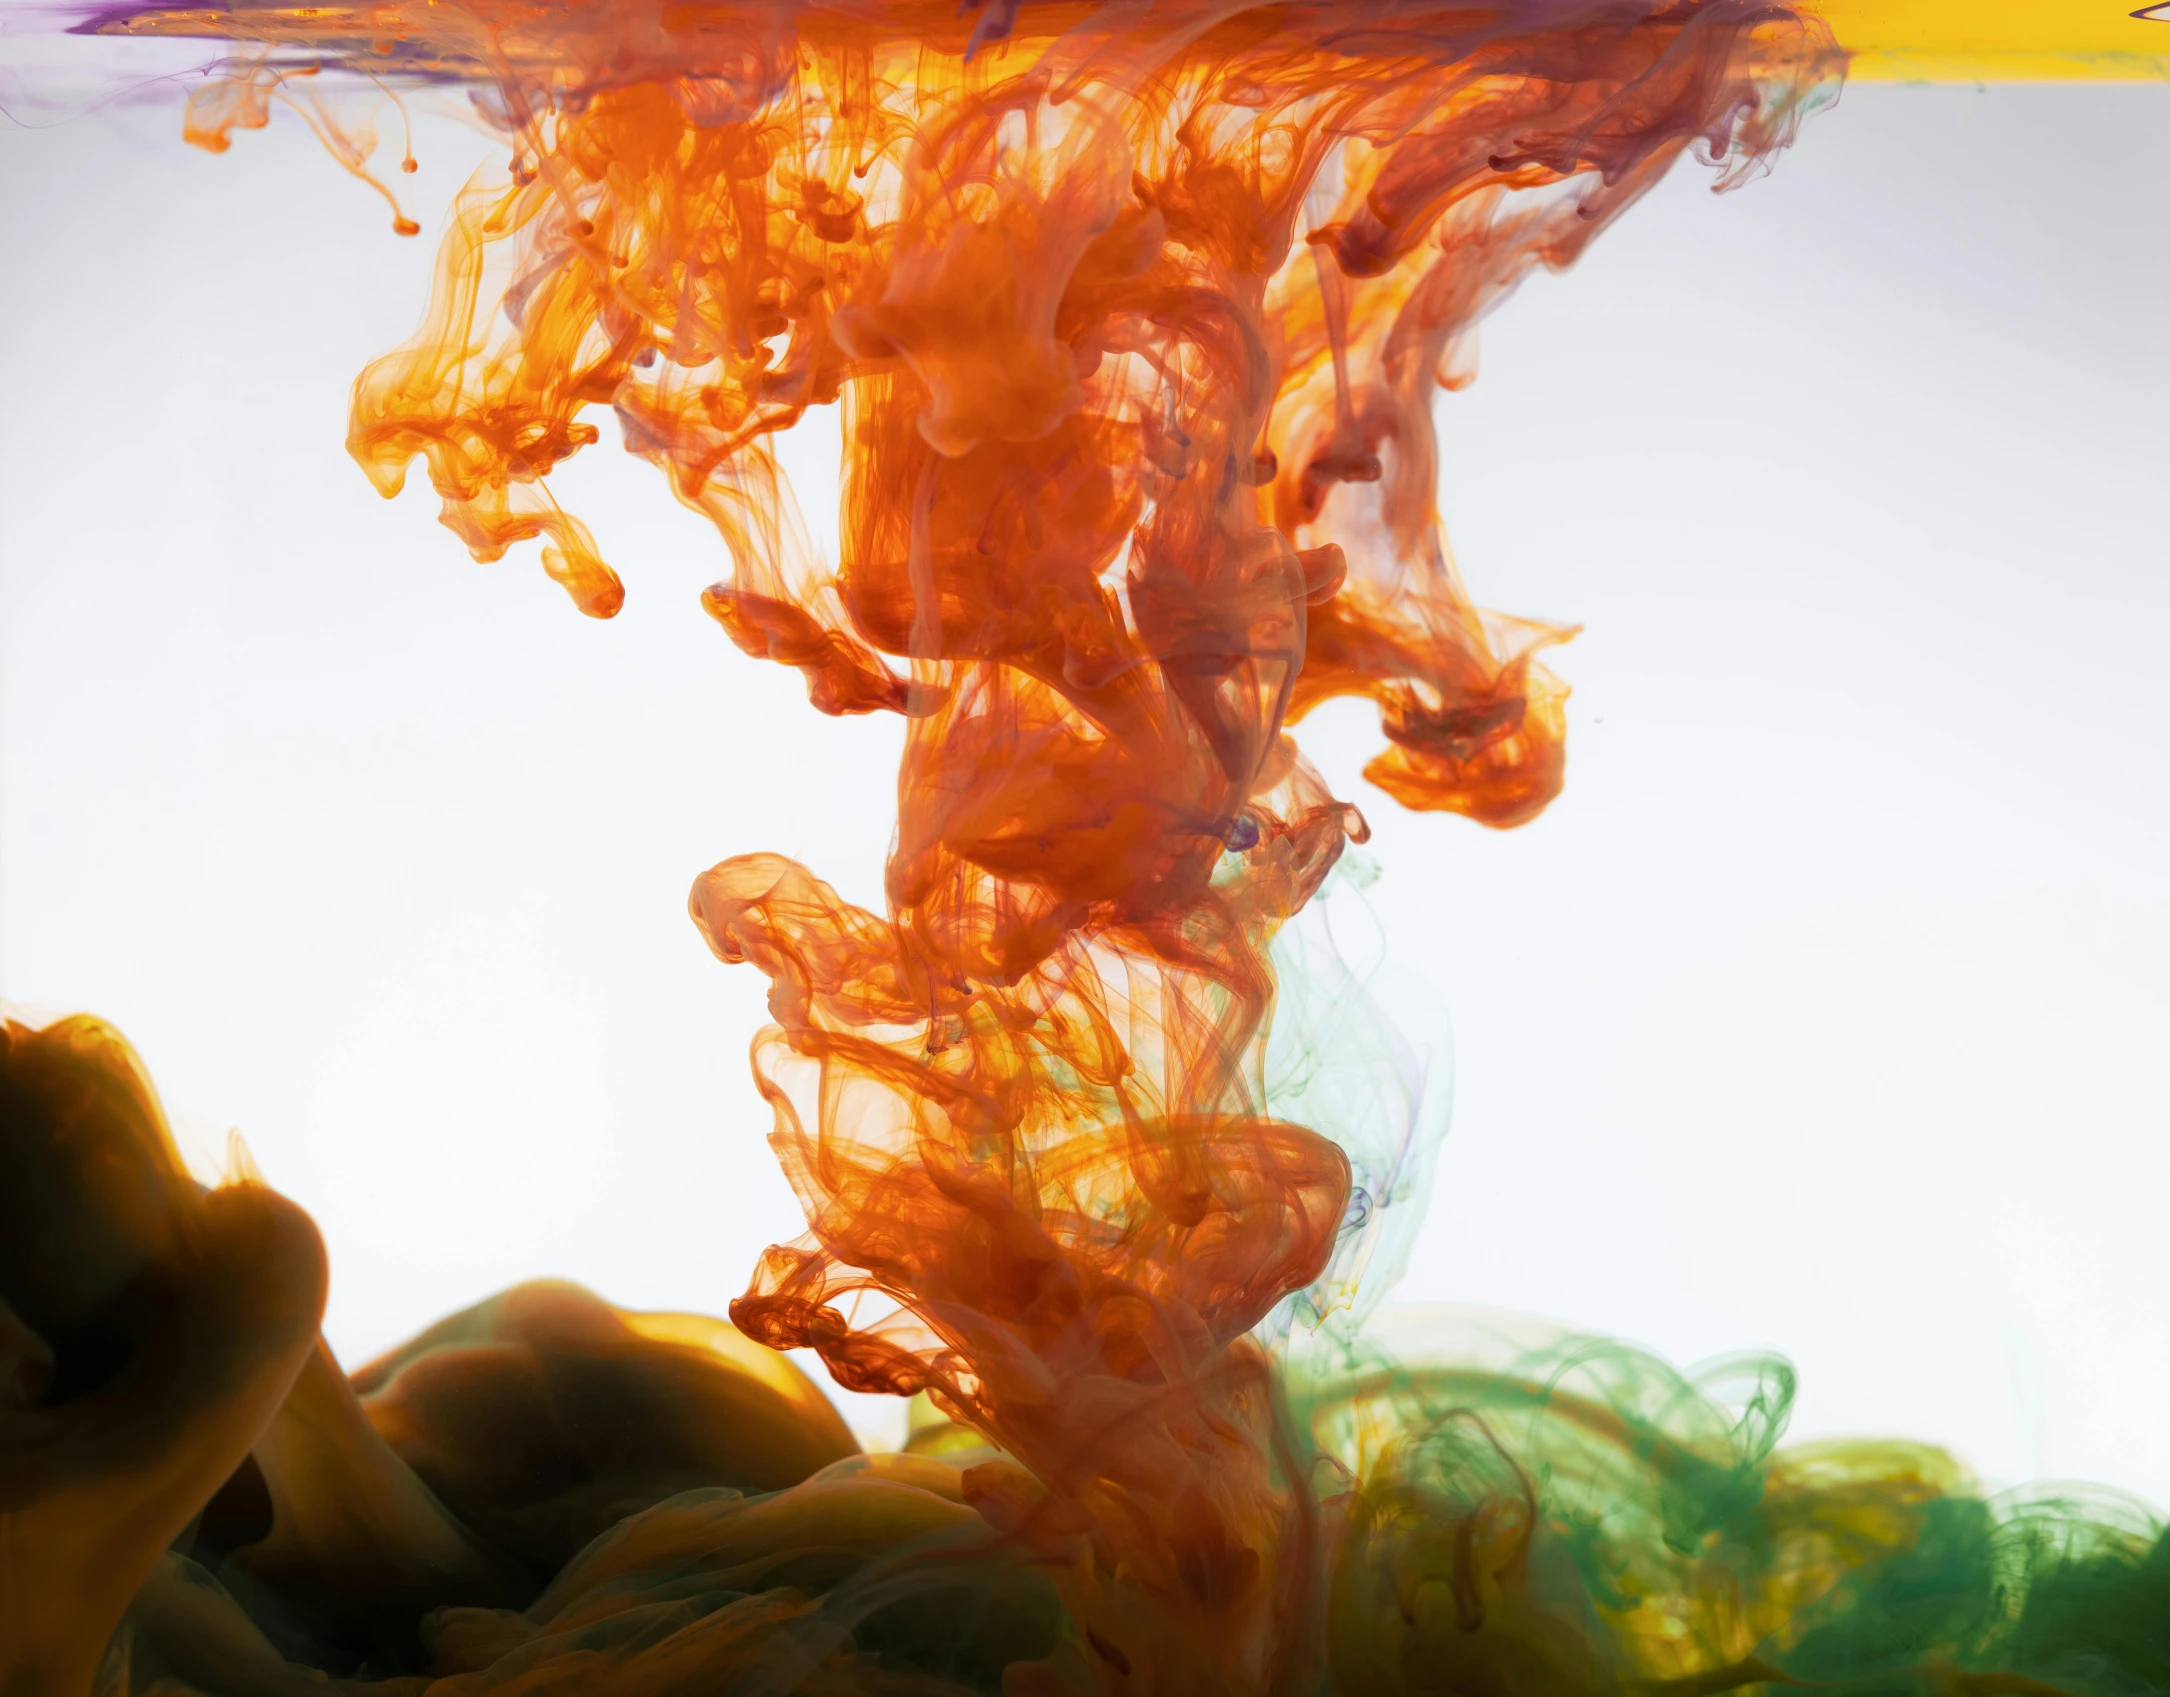 a close up of an orange substance in water, an abstract sculpture, inspired by Kim Keever, unsplash contest winner, full of greenish liquid, two tone dye, seen from below, rainbow splash of ink